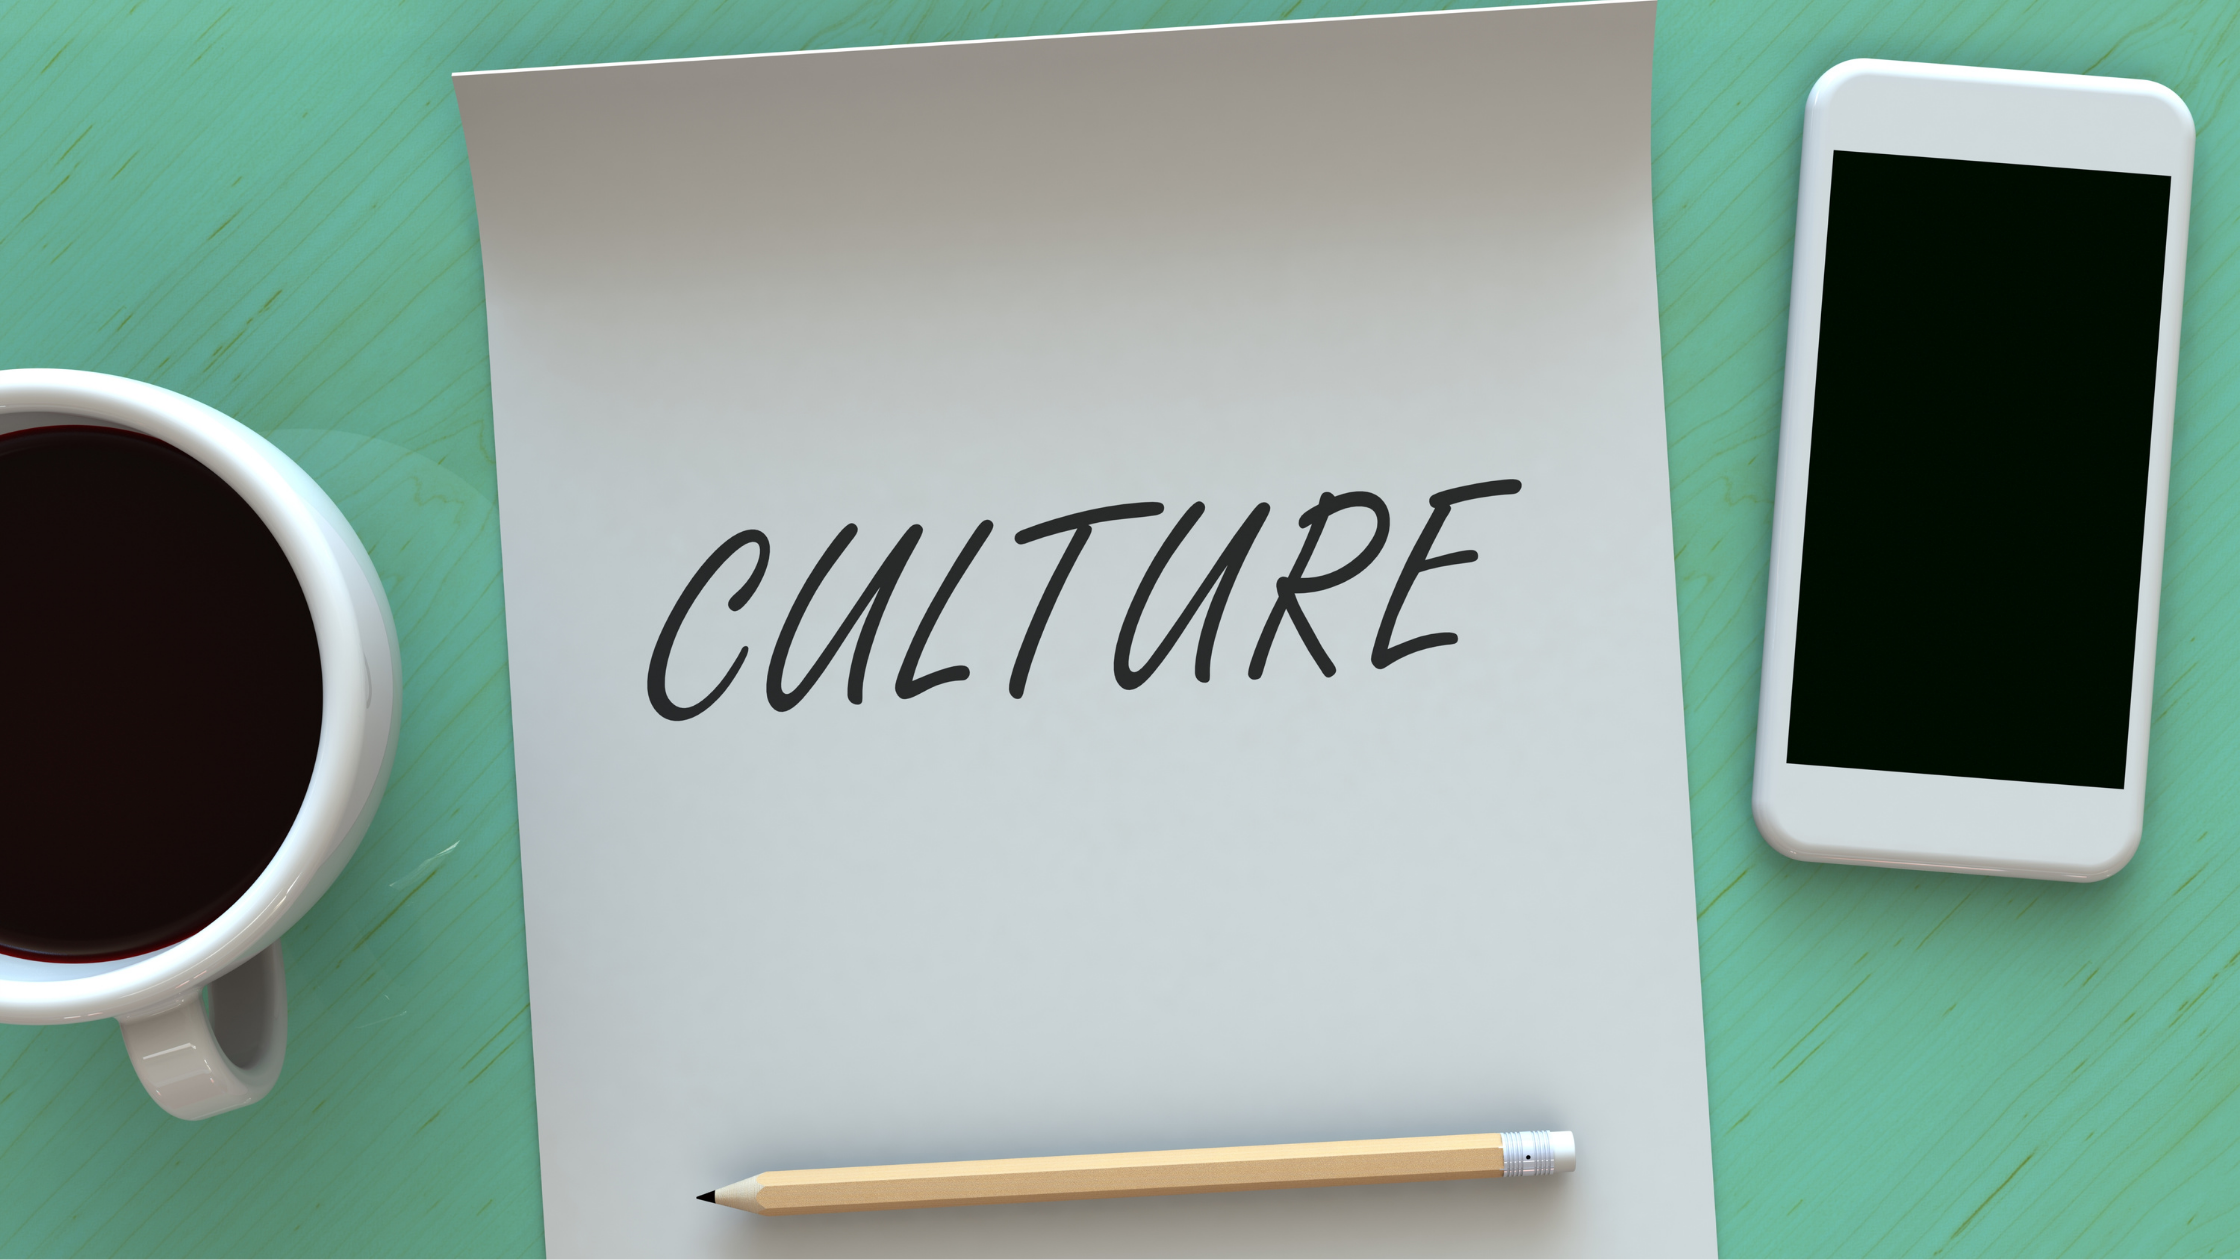 assess culture fit while hiring remotely